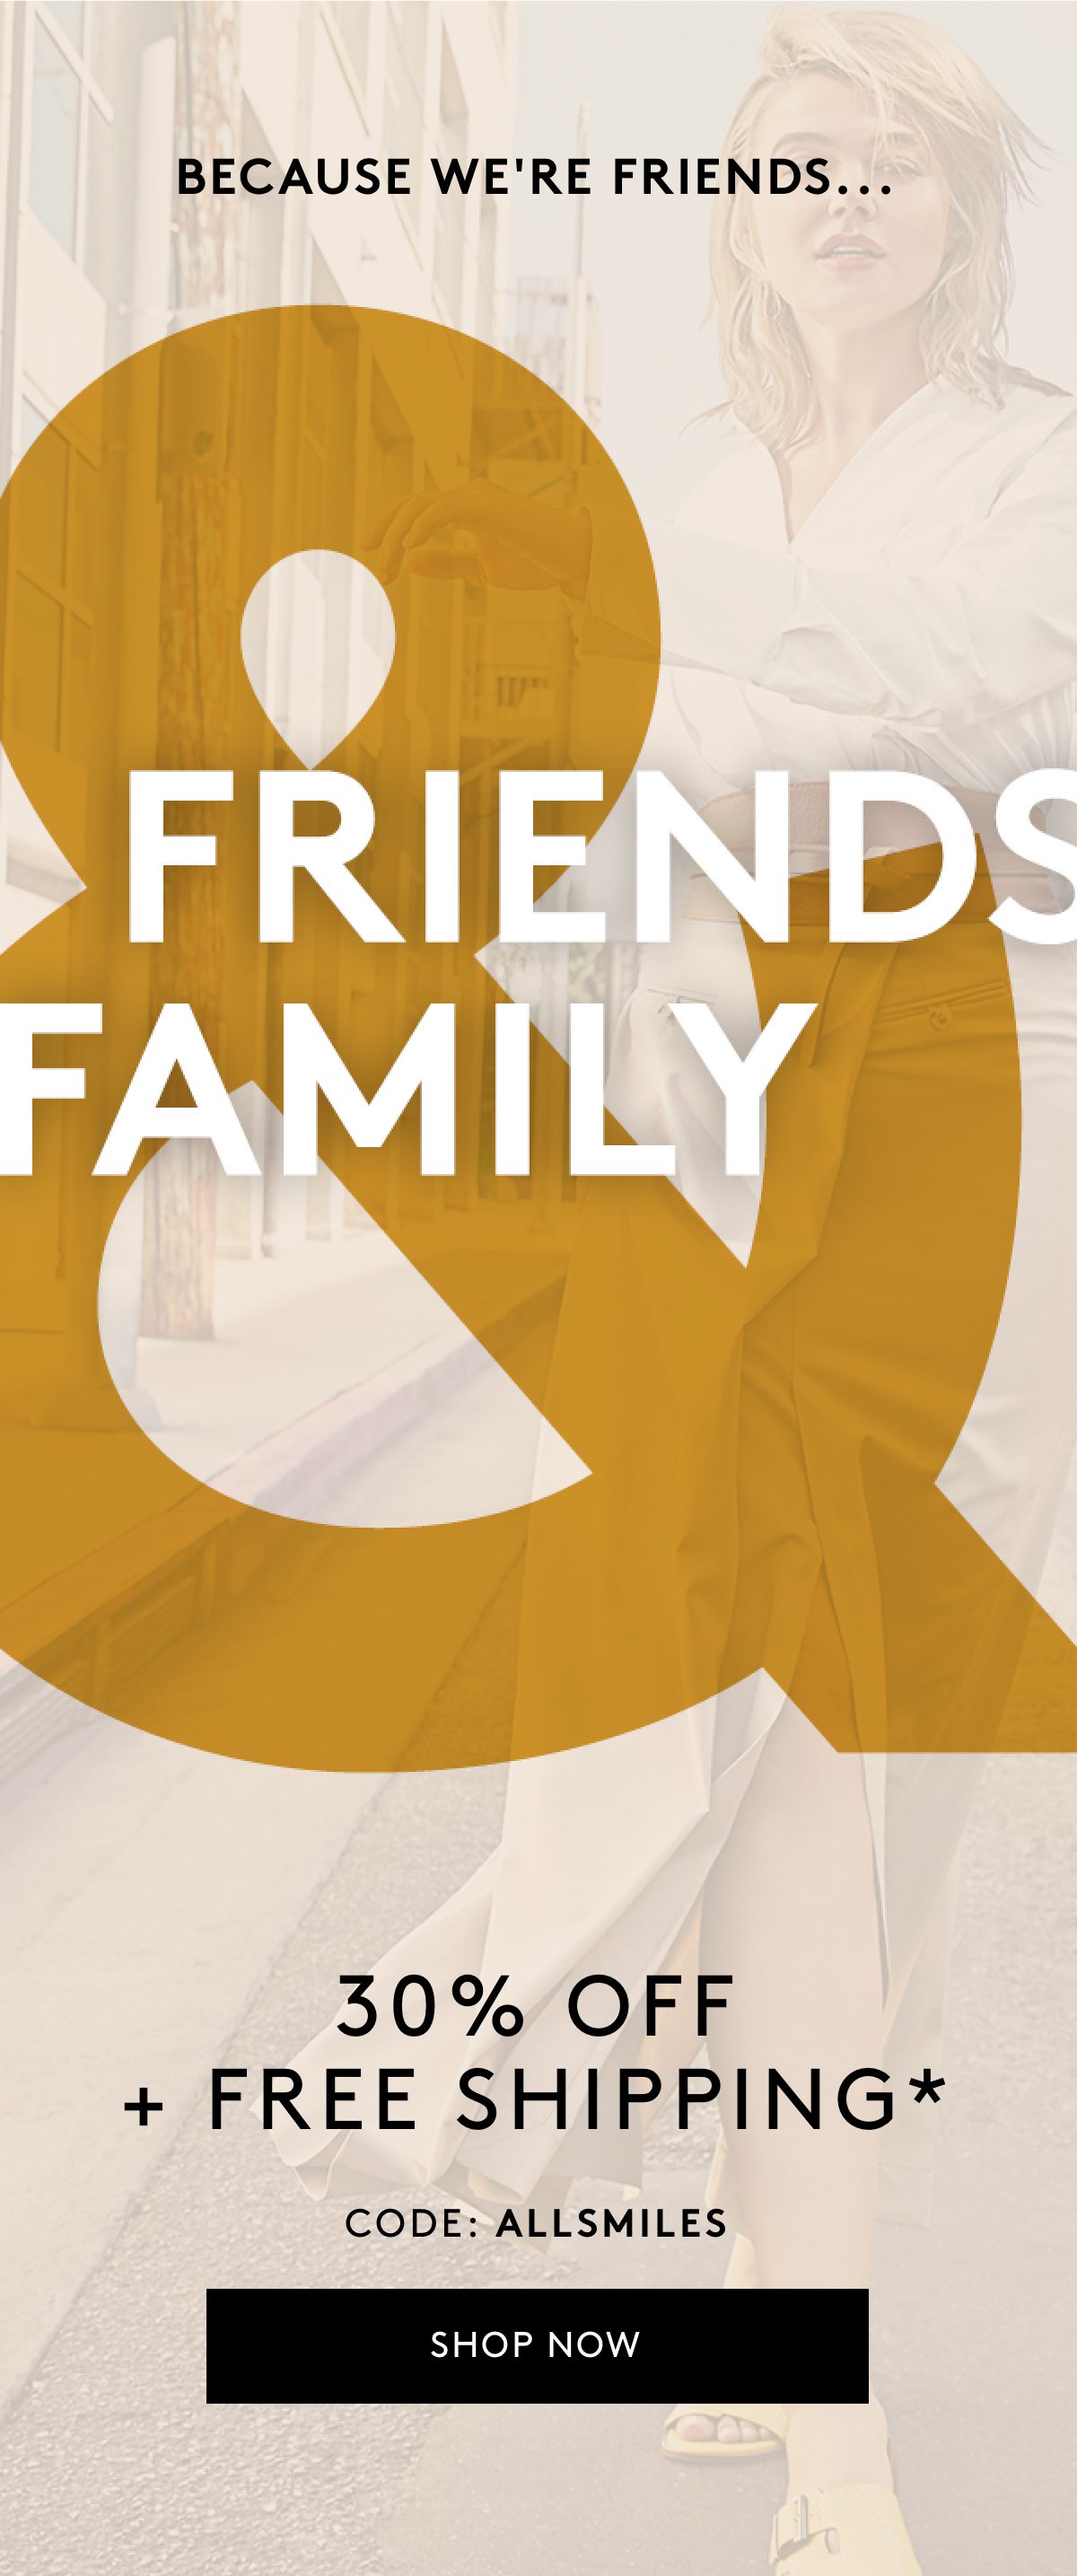 Because we're friends... friends & family 30% off + free shipping* code: ALLSMILES shop now